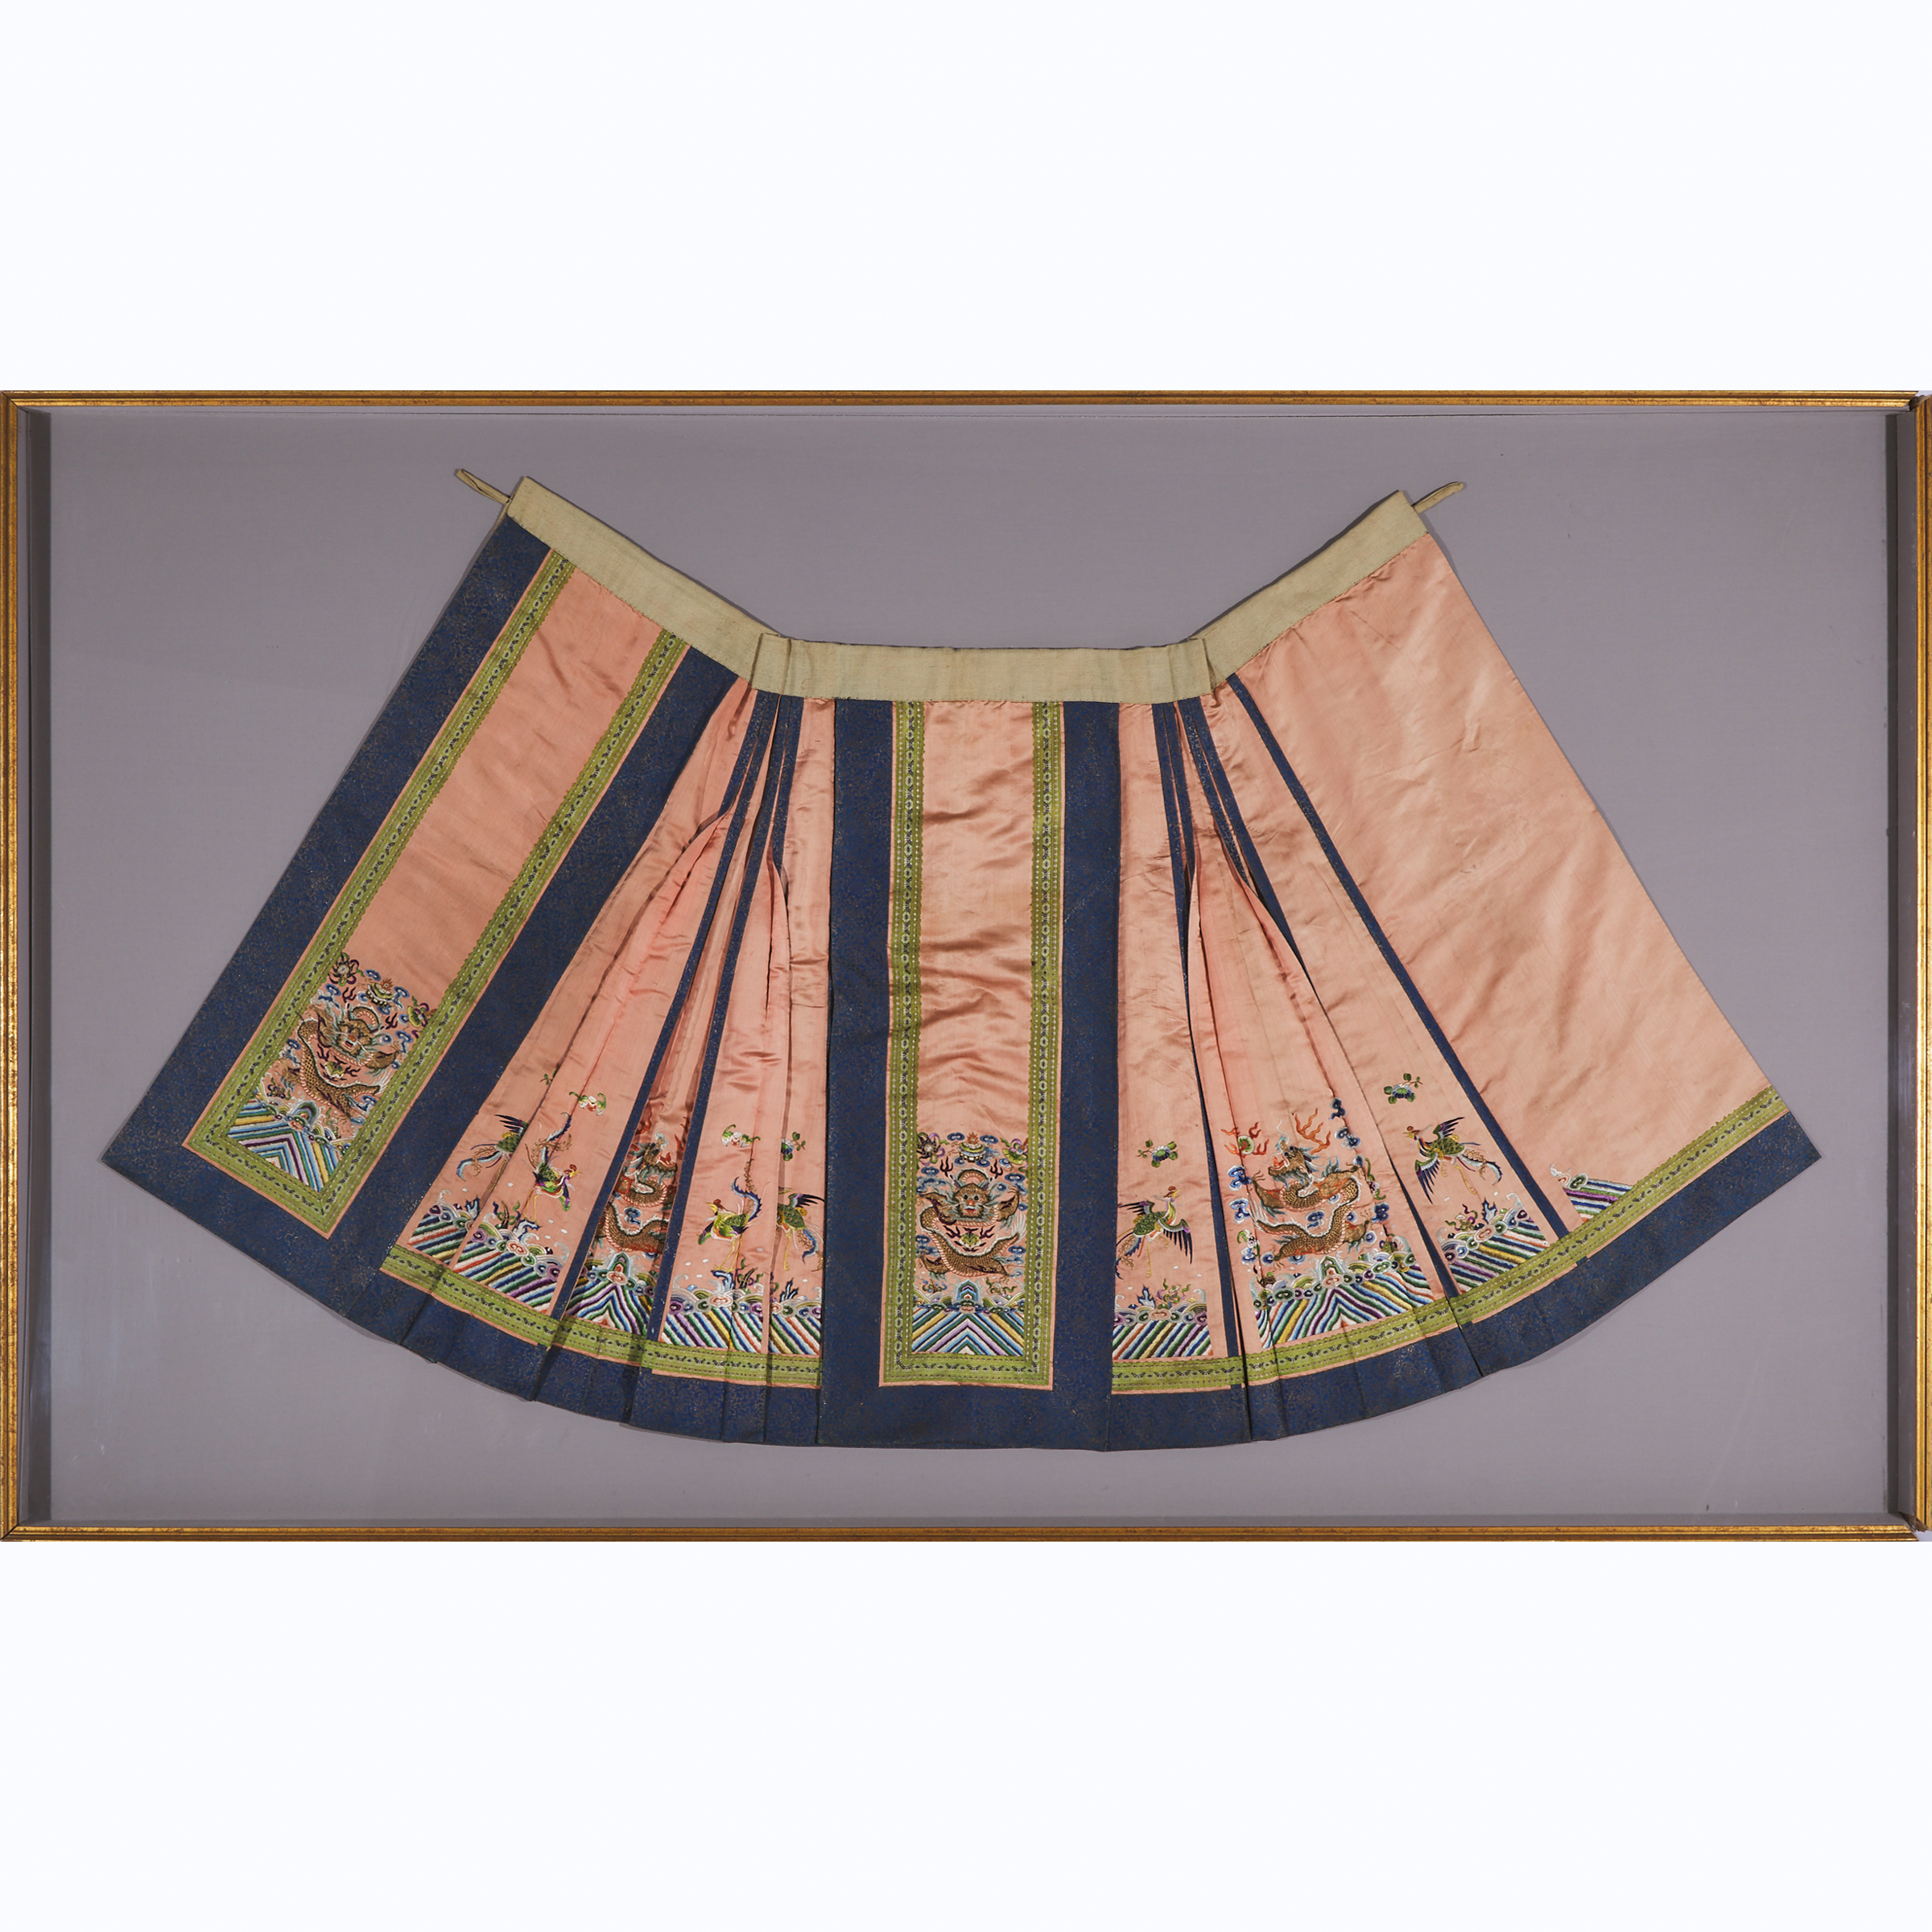 A Large Framed Chinese Silk Embroidered Skirt, Late Qing Dynasty